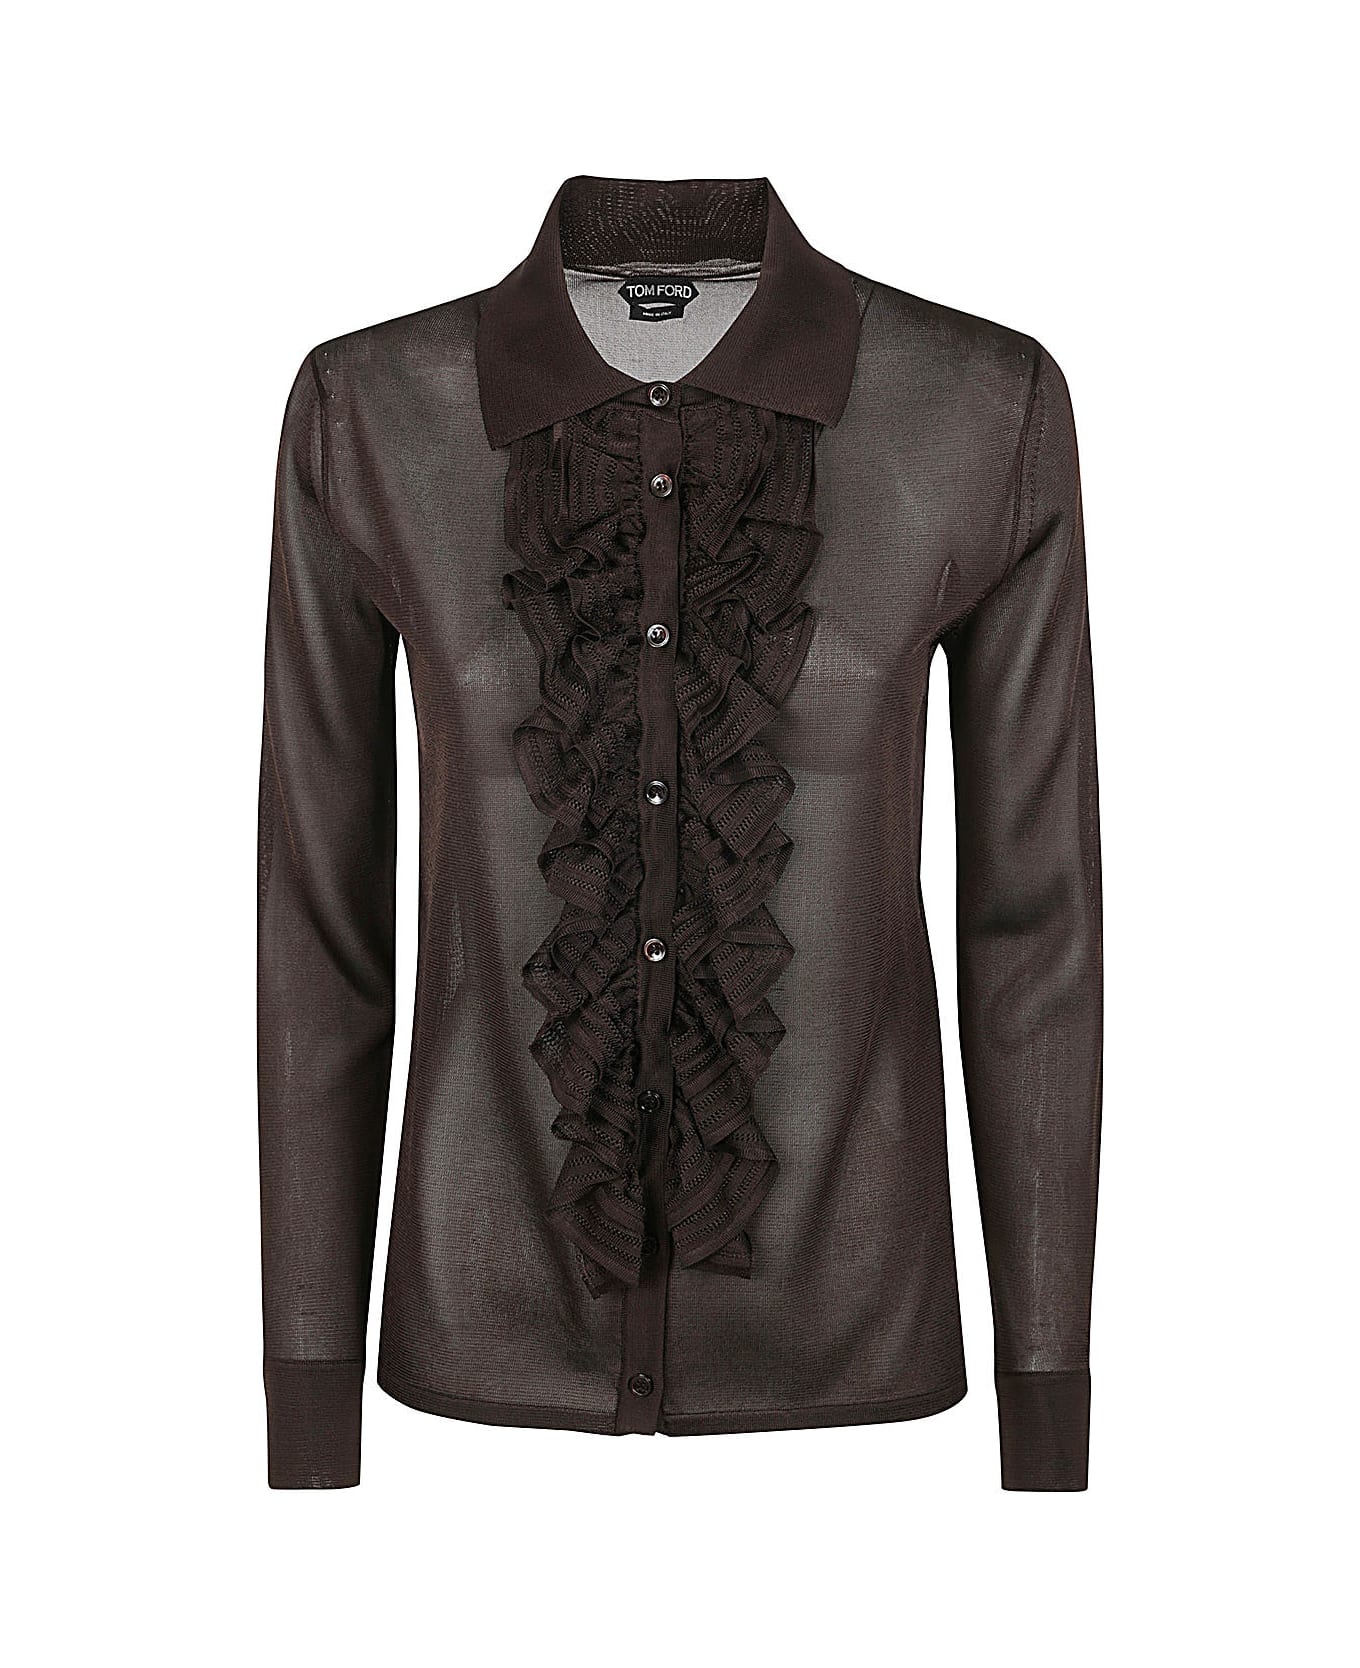 Tom Ford Knitted Shirt - Chocolate Brown